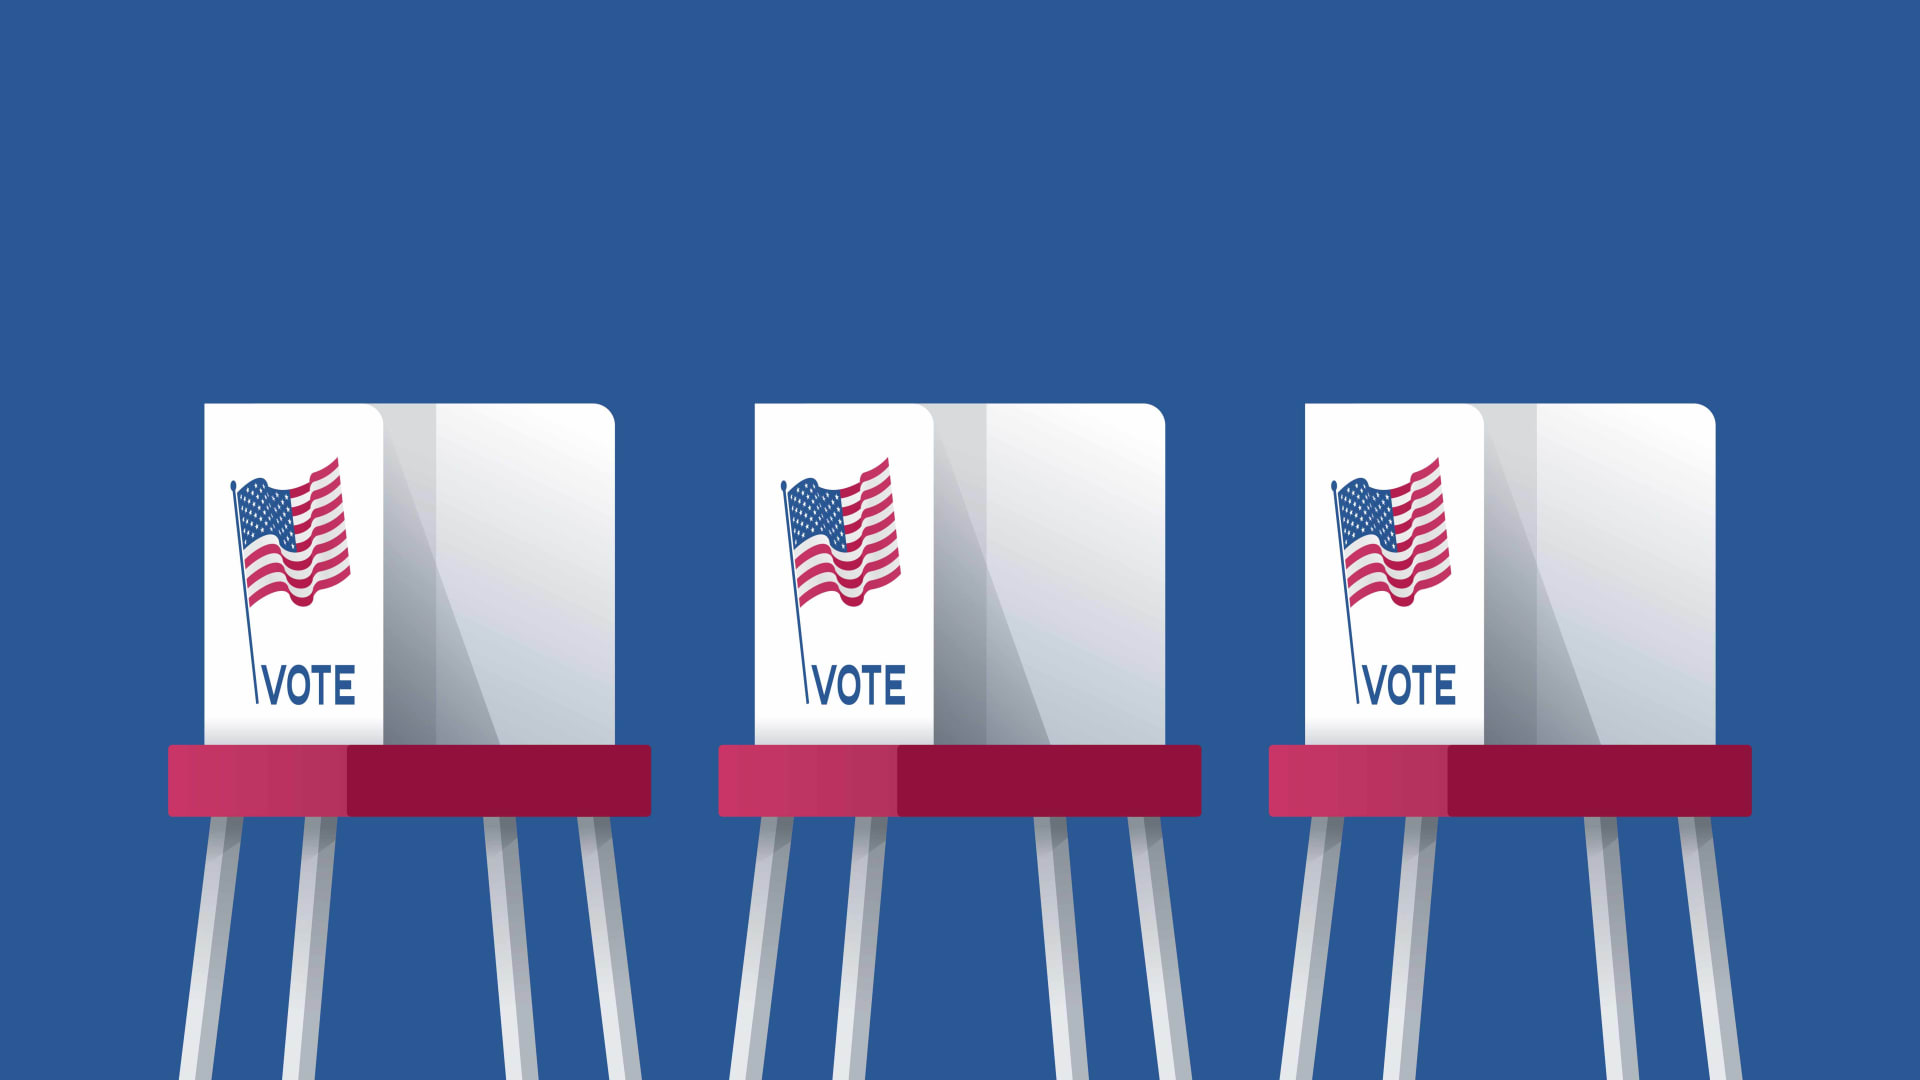 3 Ways for Small-Business Owners to Make Their Vote Count